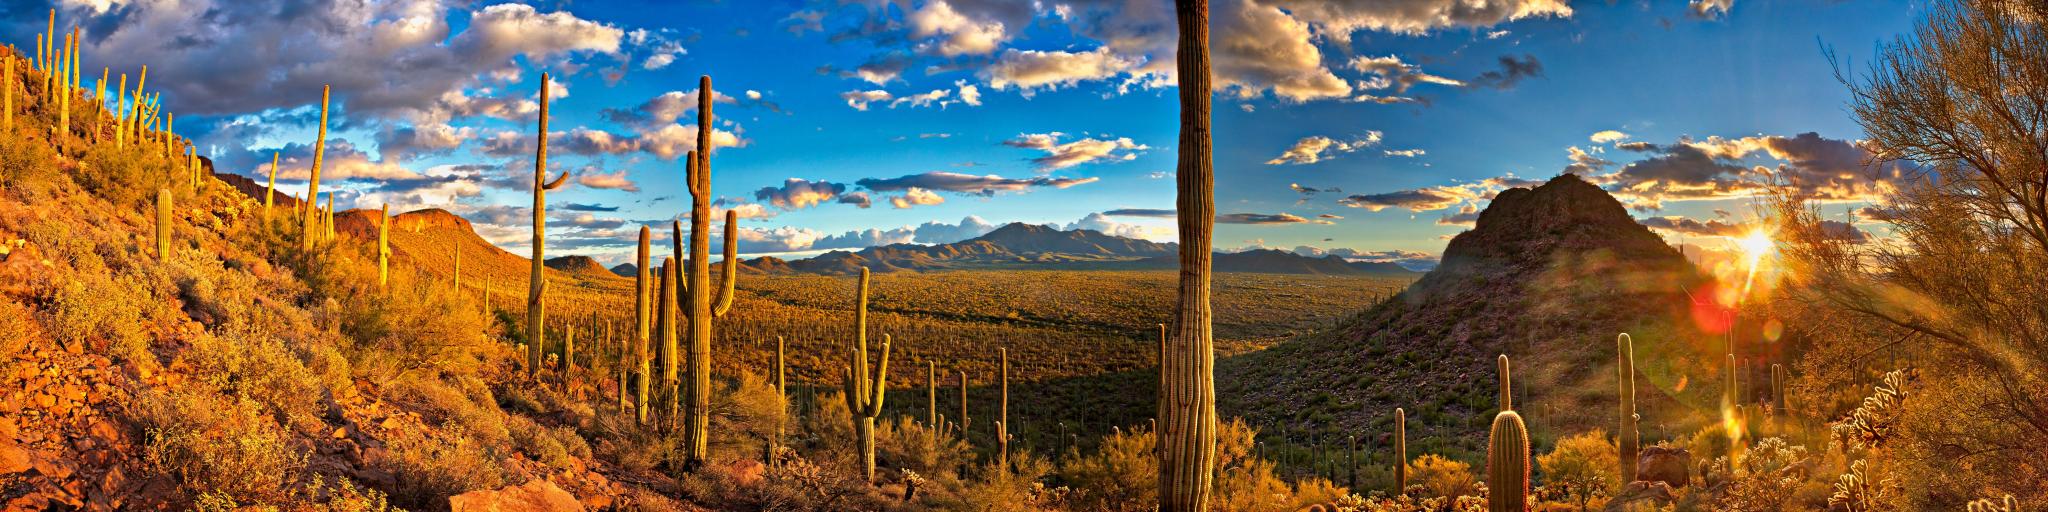 Panorama of Saguaro National Park, with cacti in the foreground and a setting sun behind